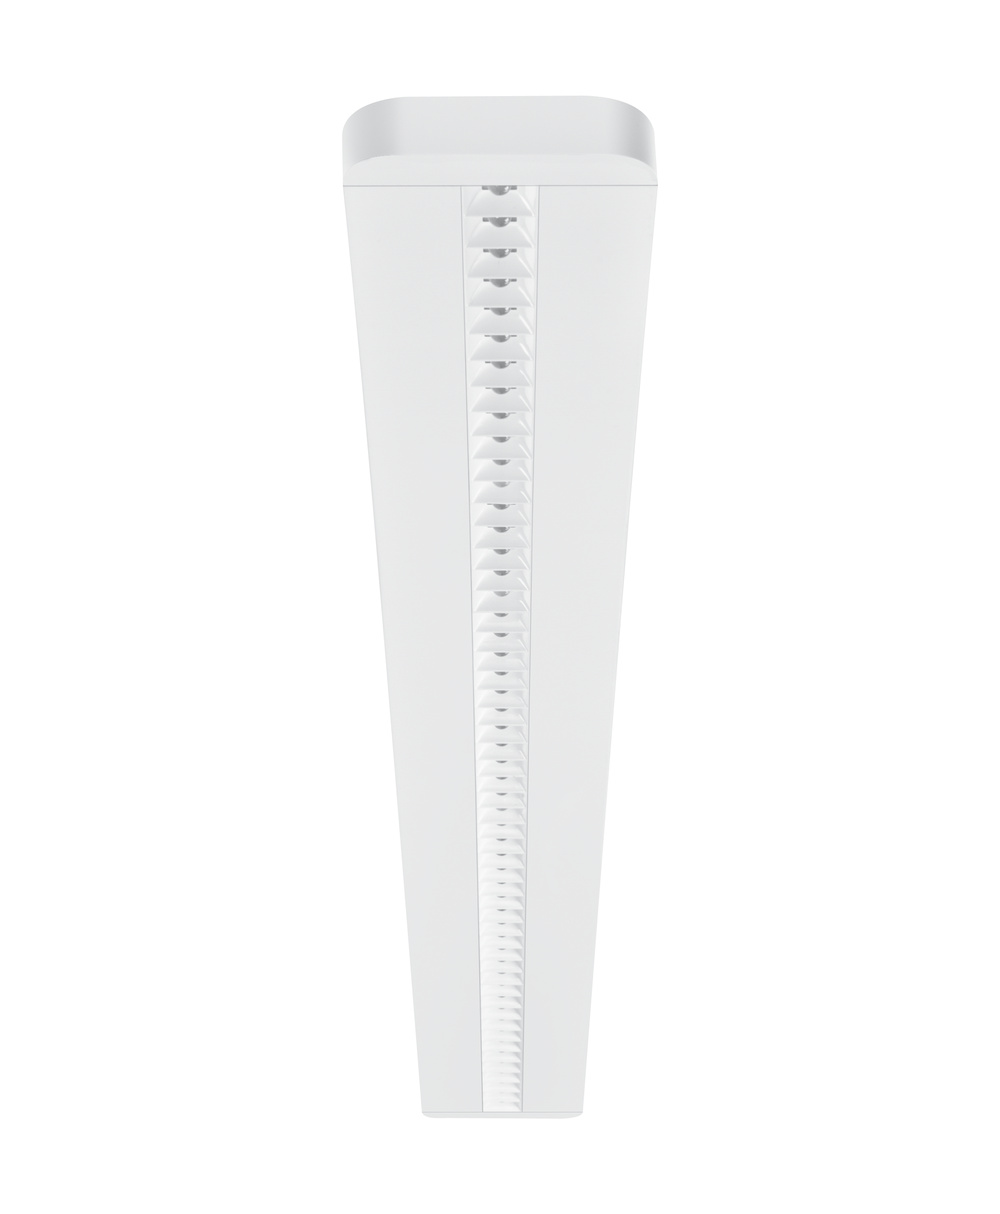 Ledvance LED linear luminaire LINEAR IndiviLED DIRECT 1500 48 W 940